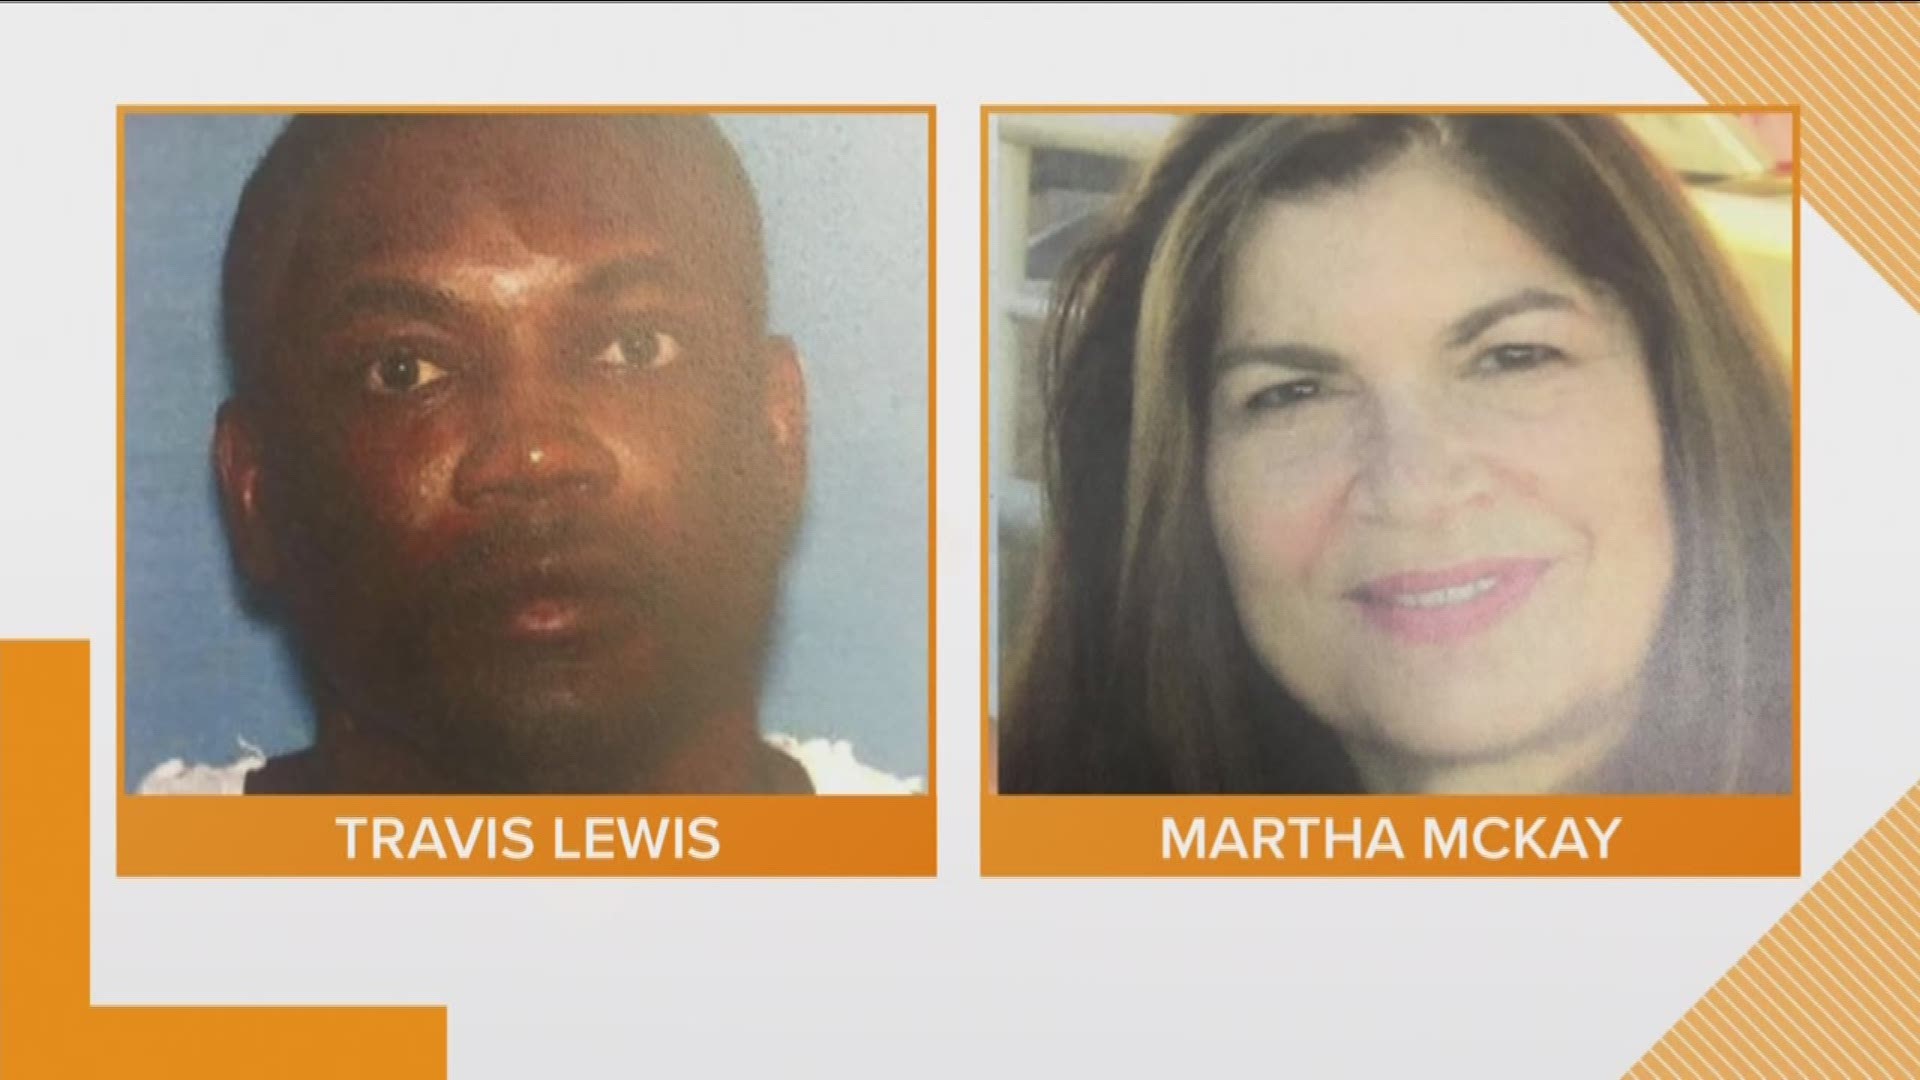 Lewis was paroled in 2018 and spent 23 years in prison for killing McKay's mother and another person at the Snowden Property.